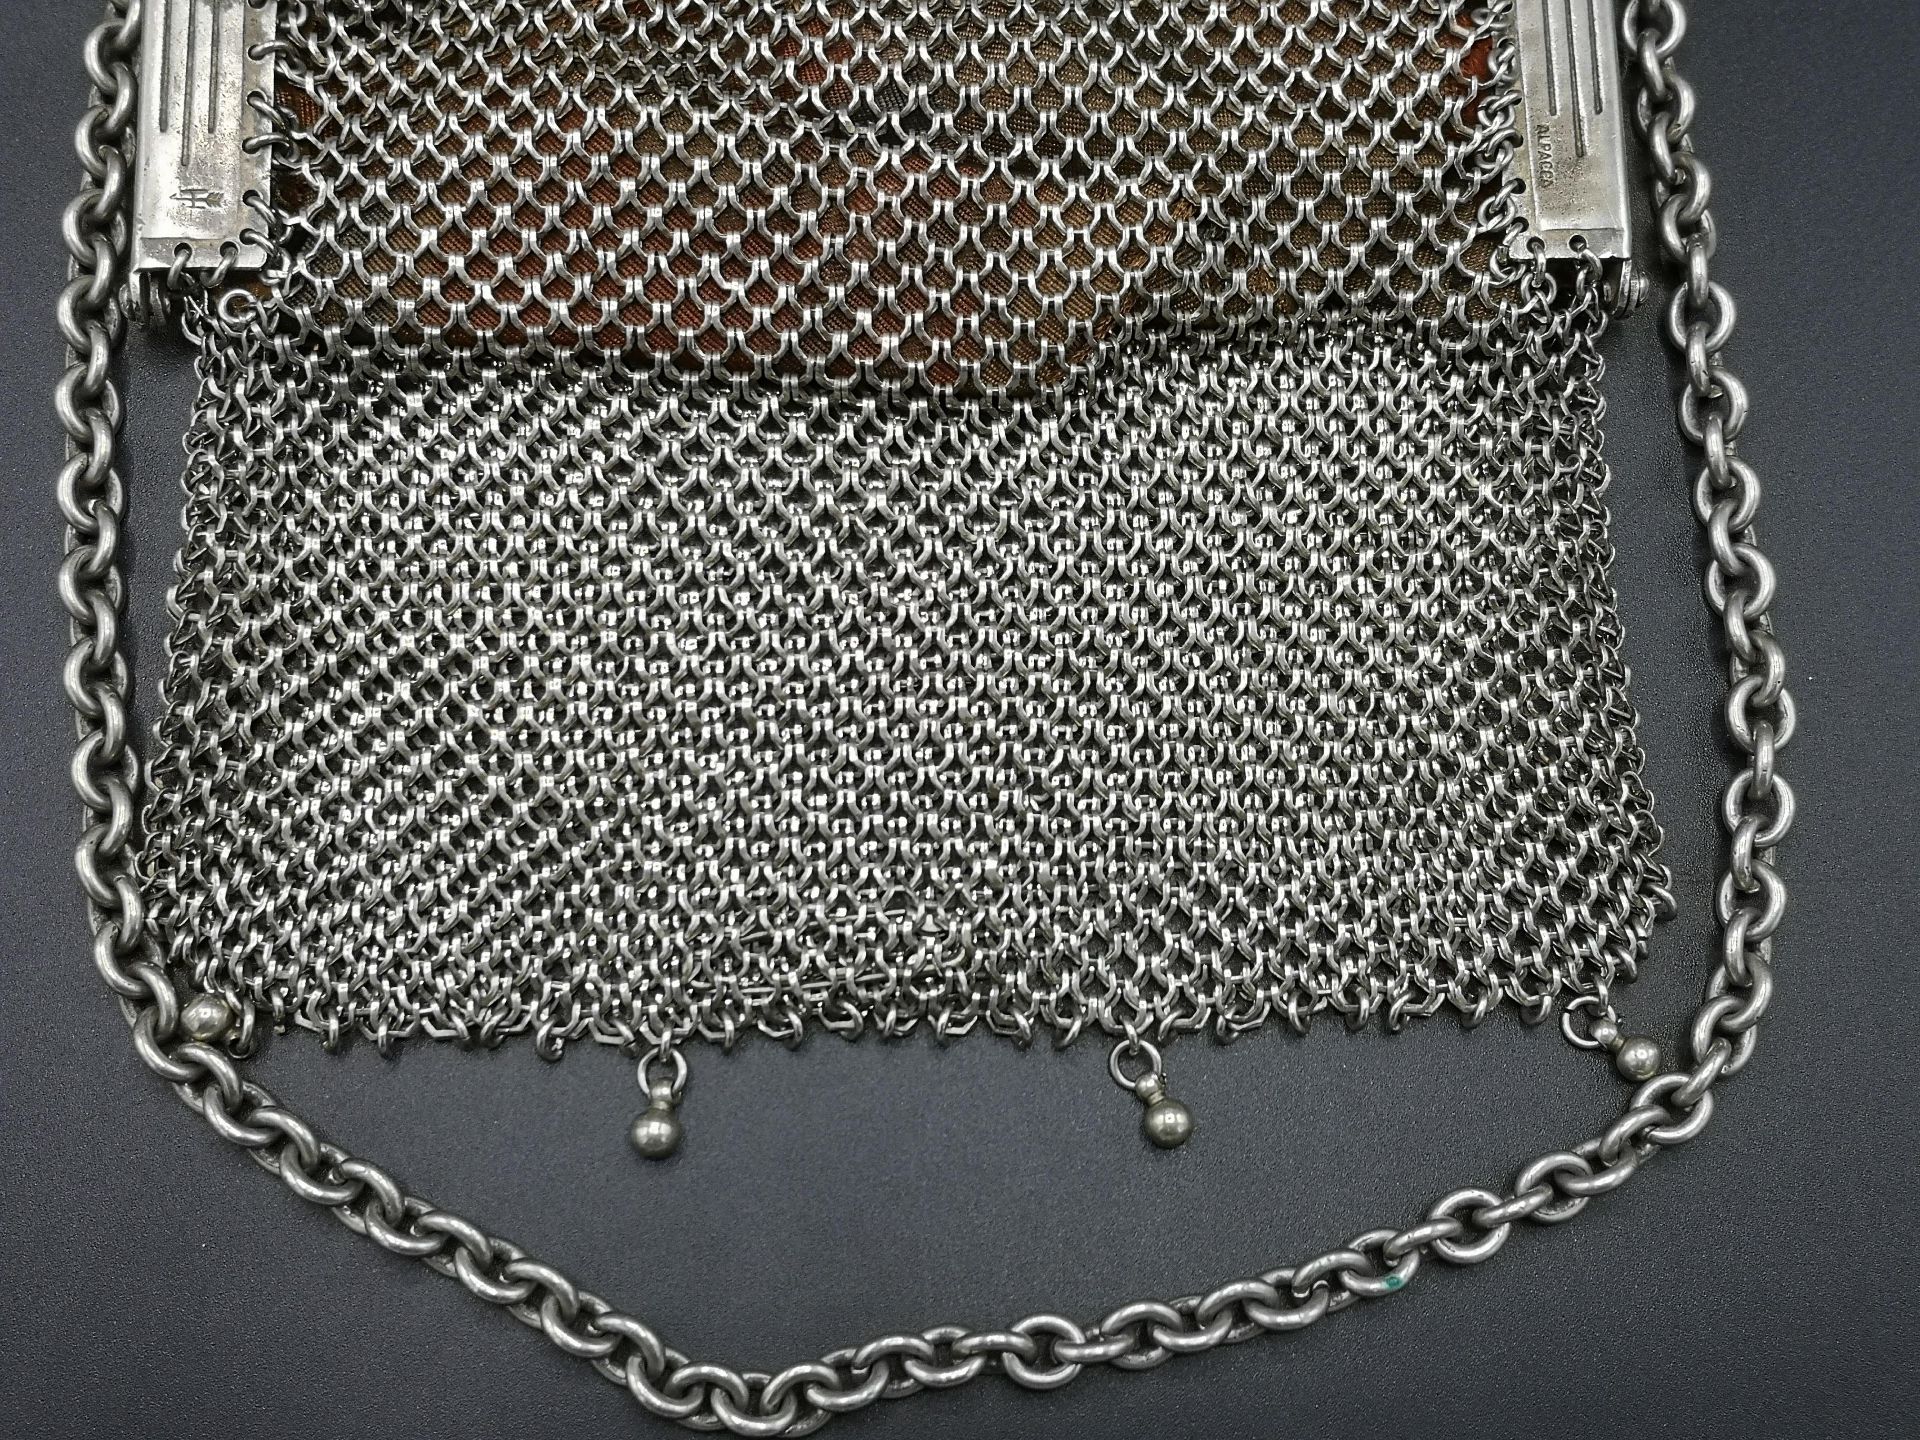 Alpacca mesh purse - Image 3 of 6